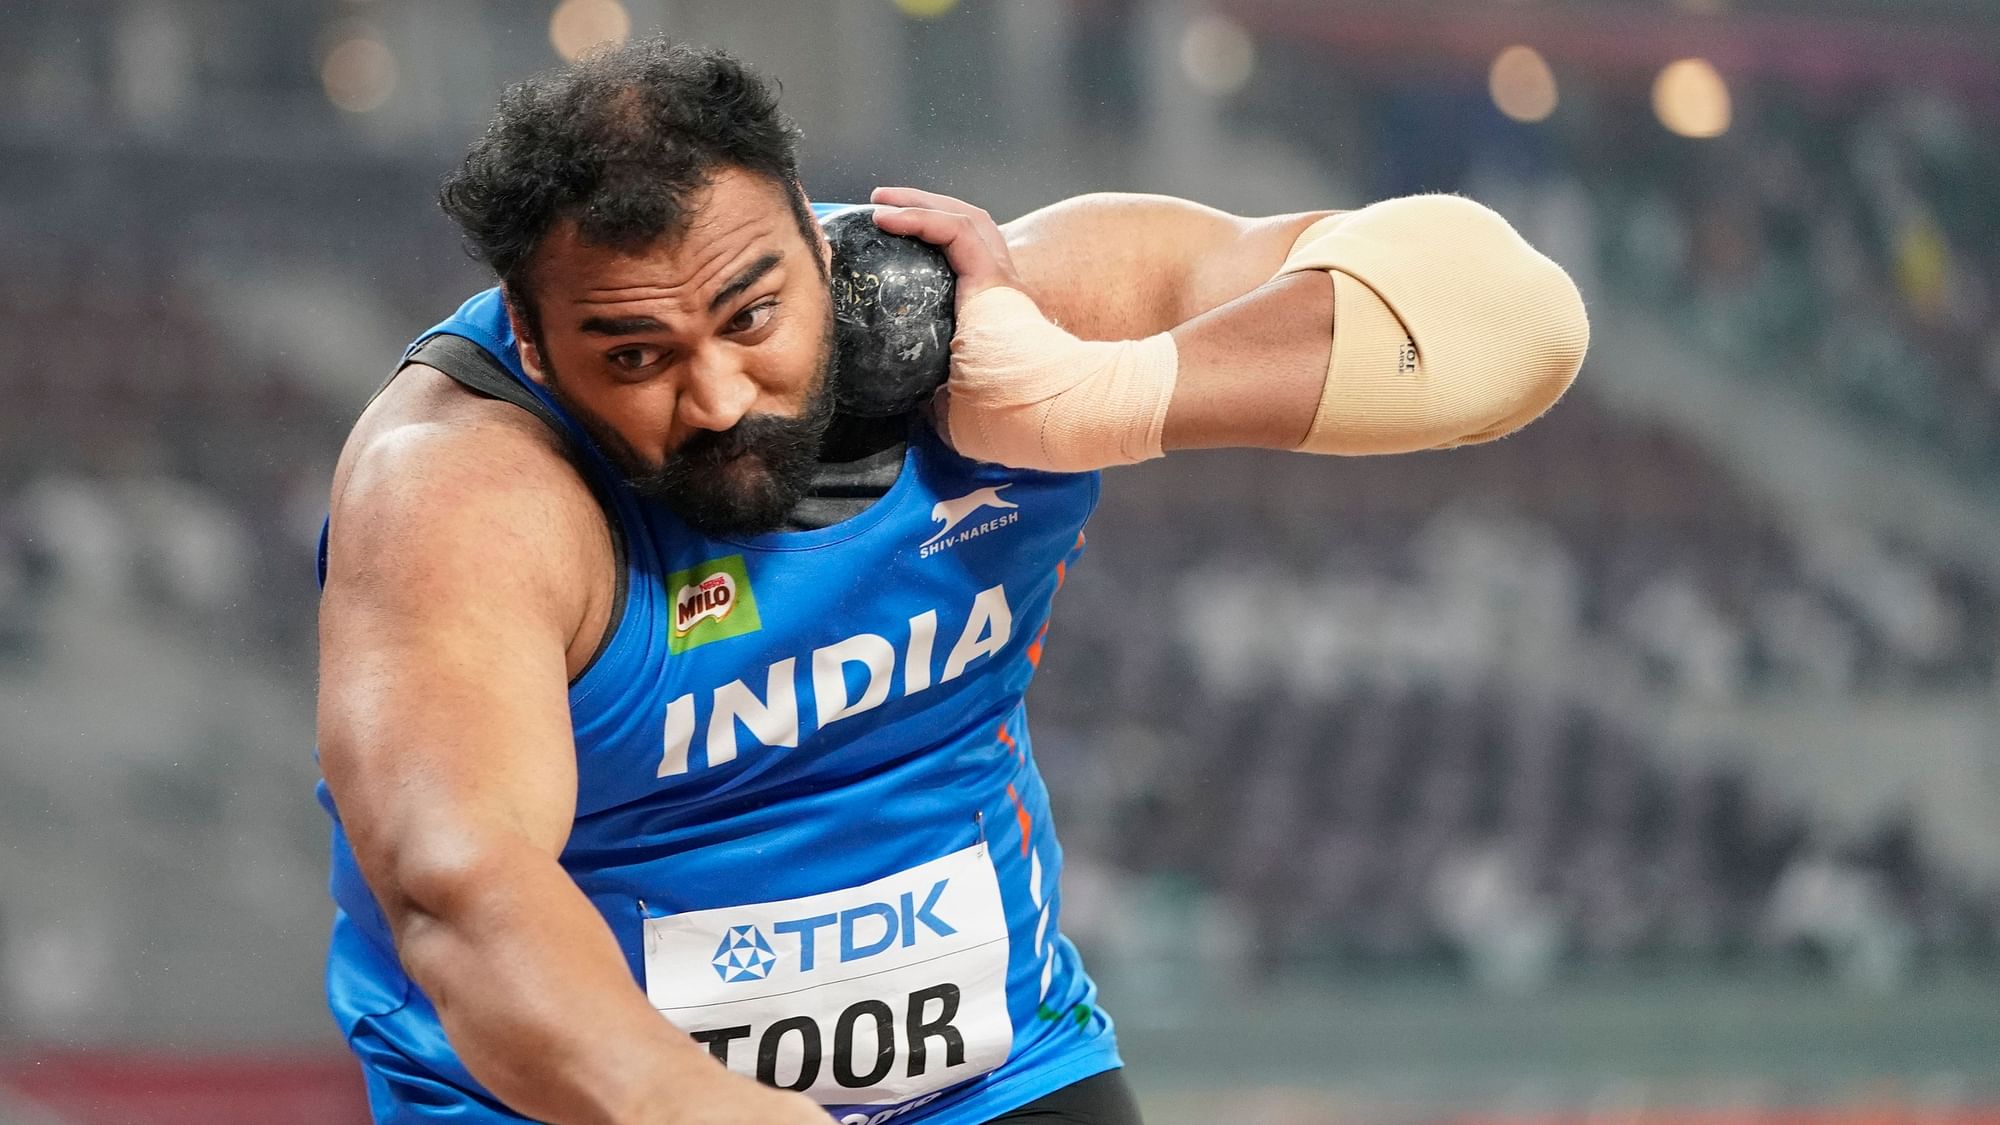 Tajinderpal Singh Toor, of India, competes in the men’s shot put qualification at the World Athletics Championships in Doha, Qatar, Thursday, Oct. 3, 2019.